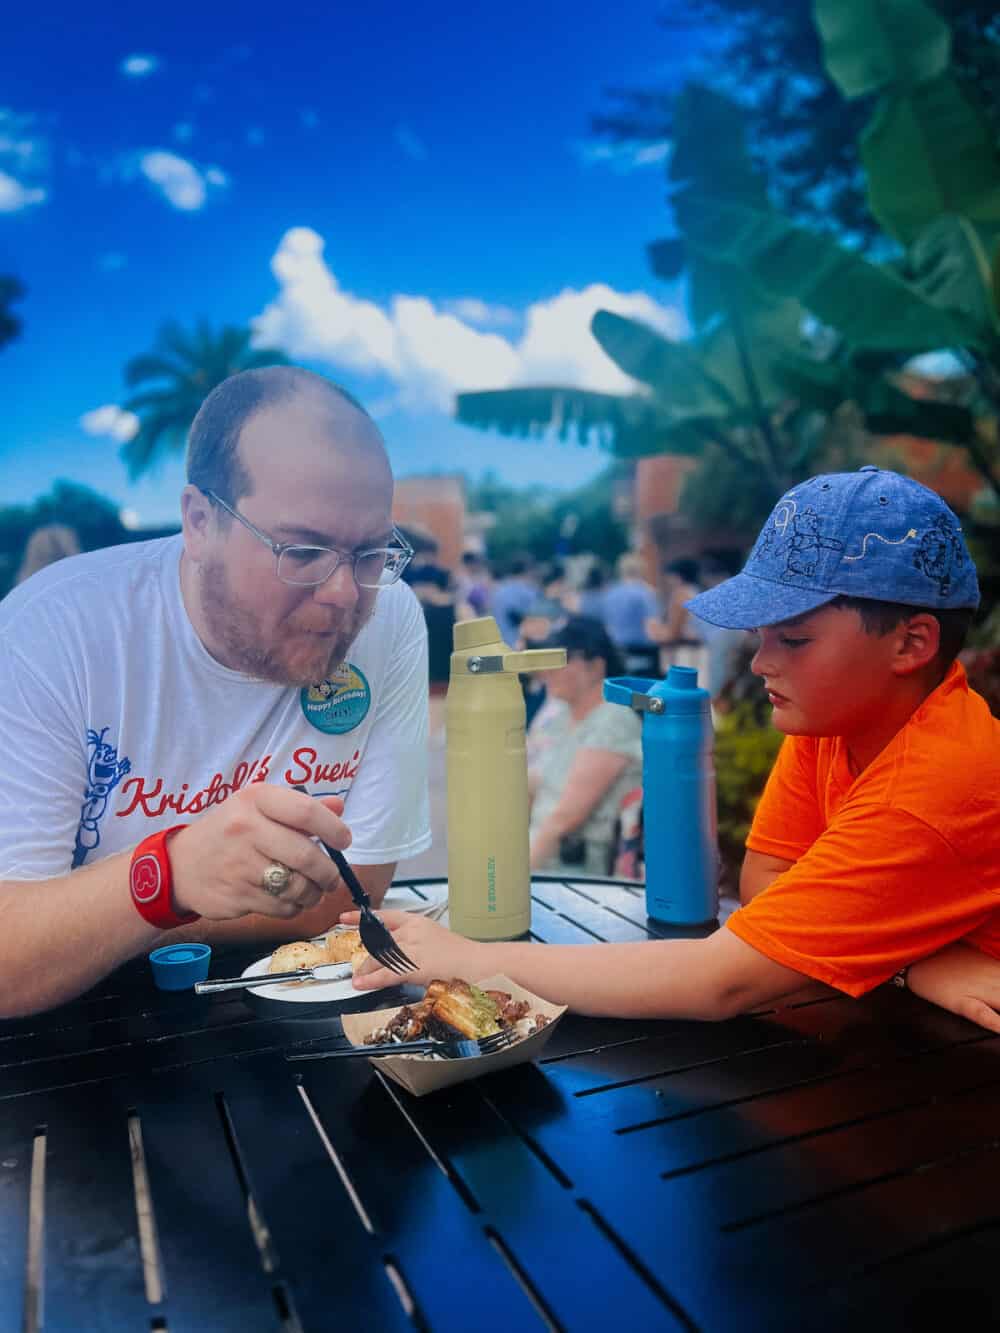 father and son having a snack in Epcot at Disney World 